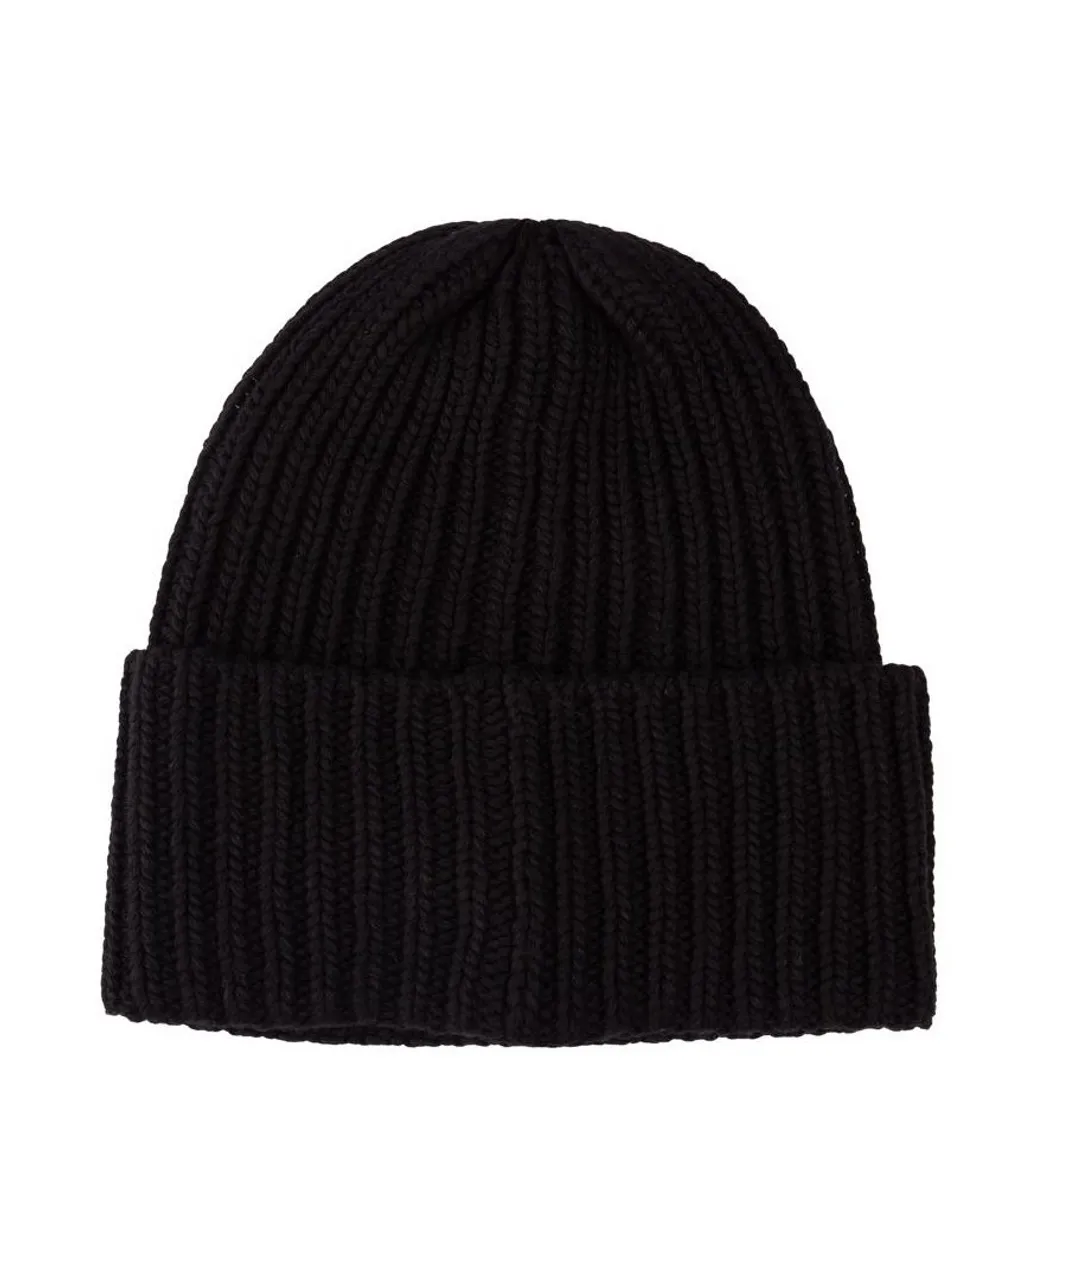 Tommy Hilfiger Womens Limitless Chic Beanie - Black - One